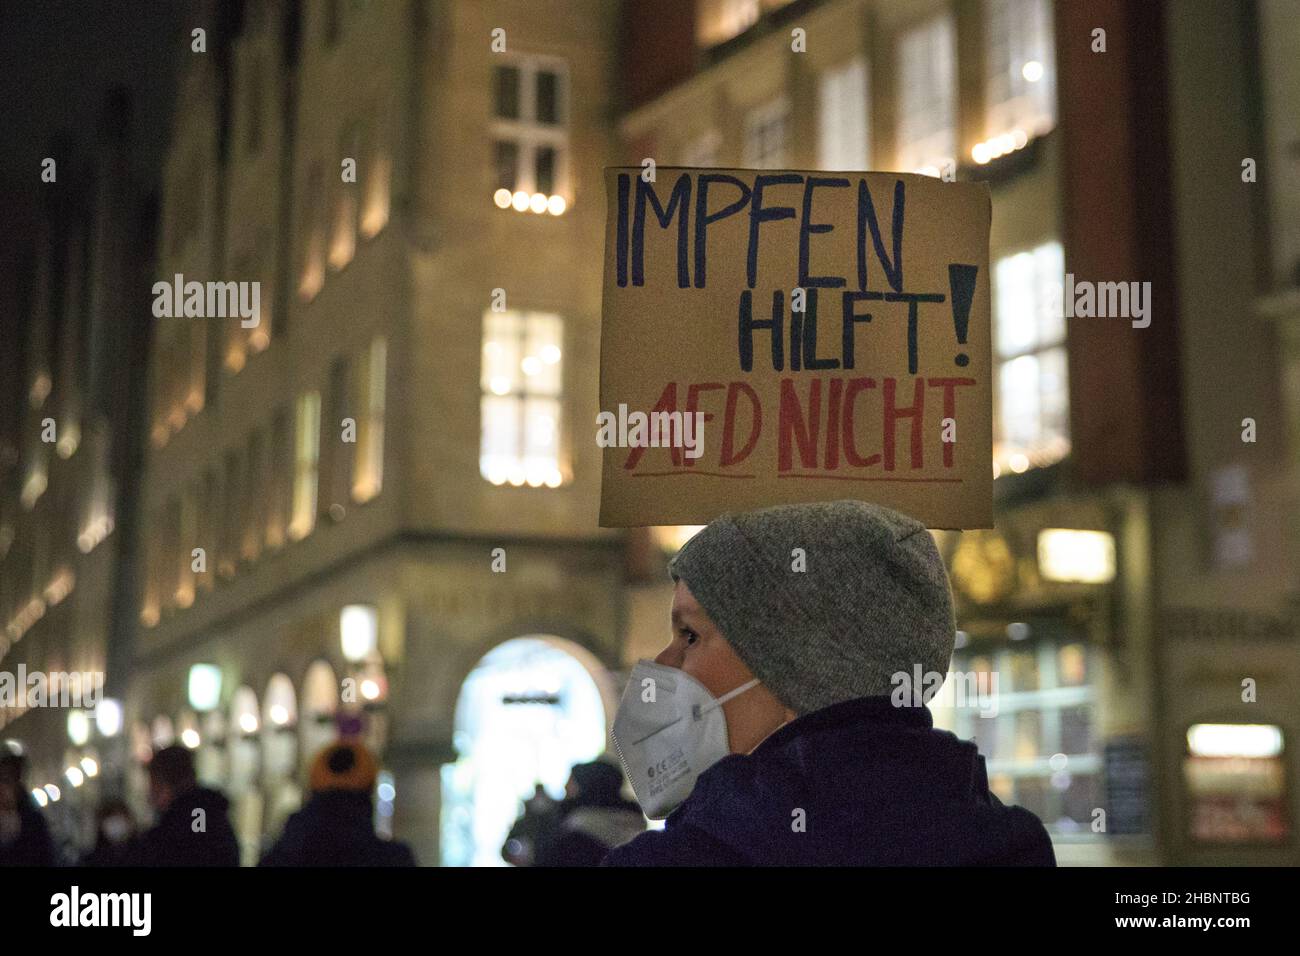 Münster, NRW, Germany. 20th Dec, 2021. A protester with 'Impfen Hilft, AFD Nicht' (vaccinating helps, AFD doesn't) placard. Activists and protesters from several organisations have congregated in the city centre, protesting against conspiracy theories, racism, anti-semitism and social segregation, and for vaccinations. Credit: Imageplotter/Alamy Live News Stock Photo